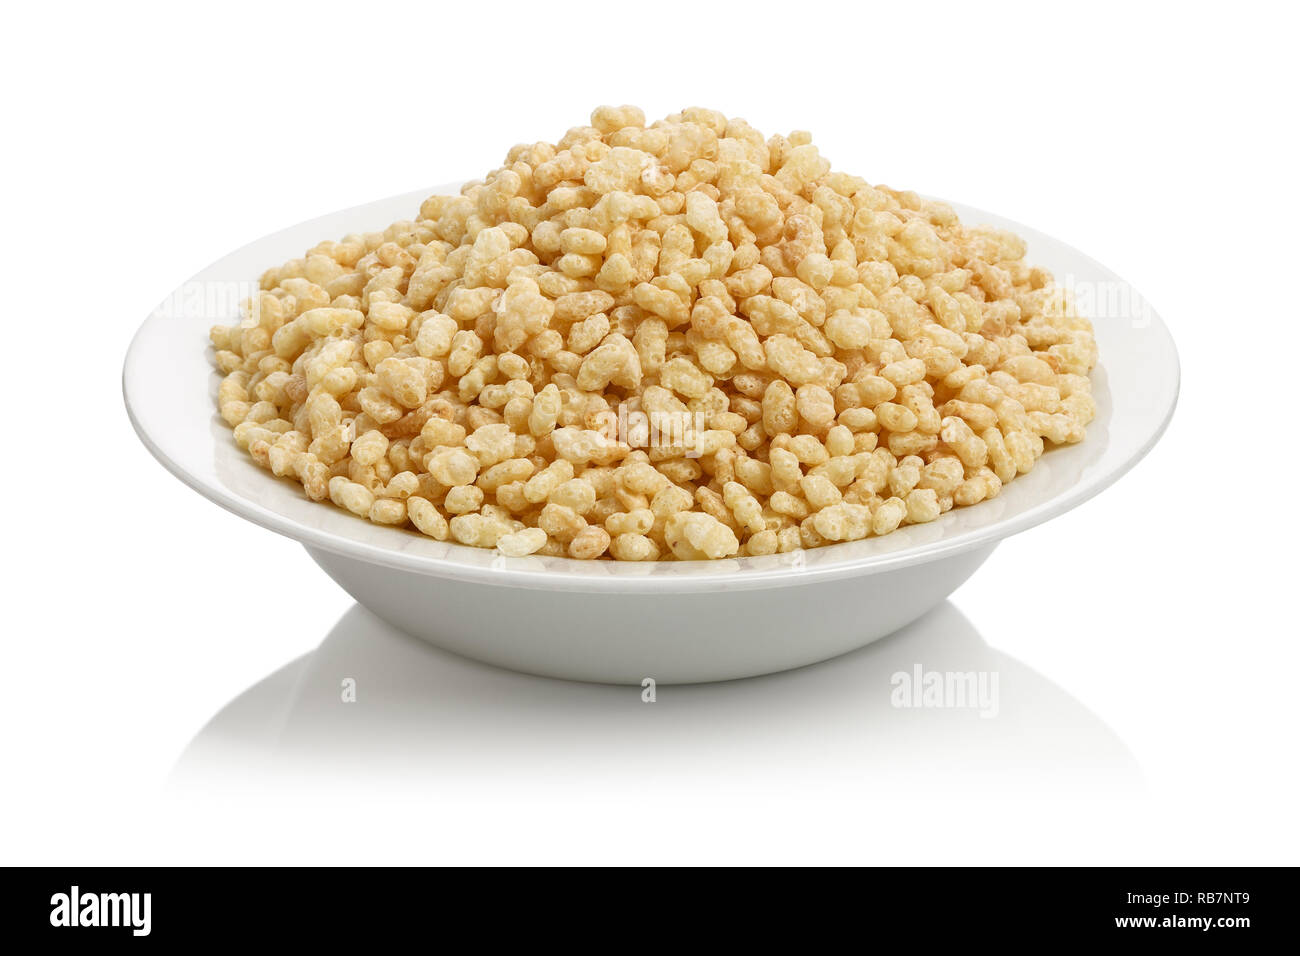 A bowl filled with Kellogg's Ricicles breakfast cereal Stock Photo